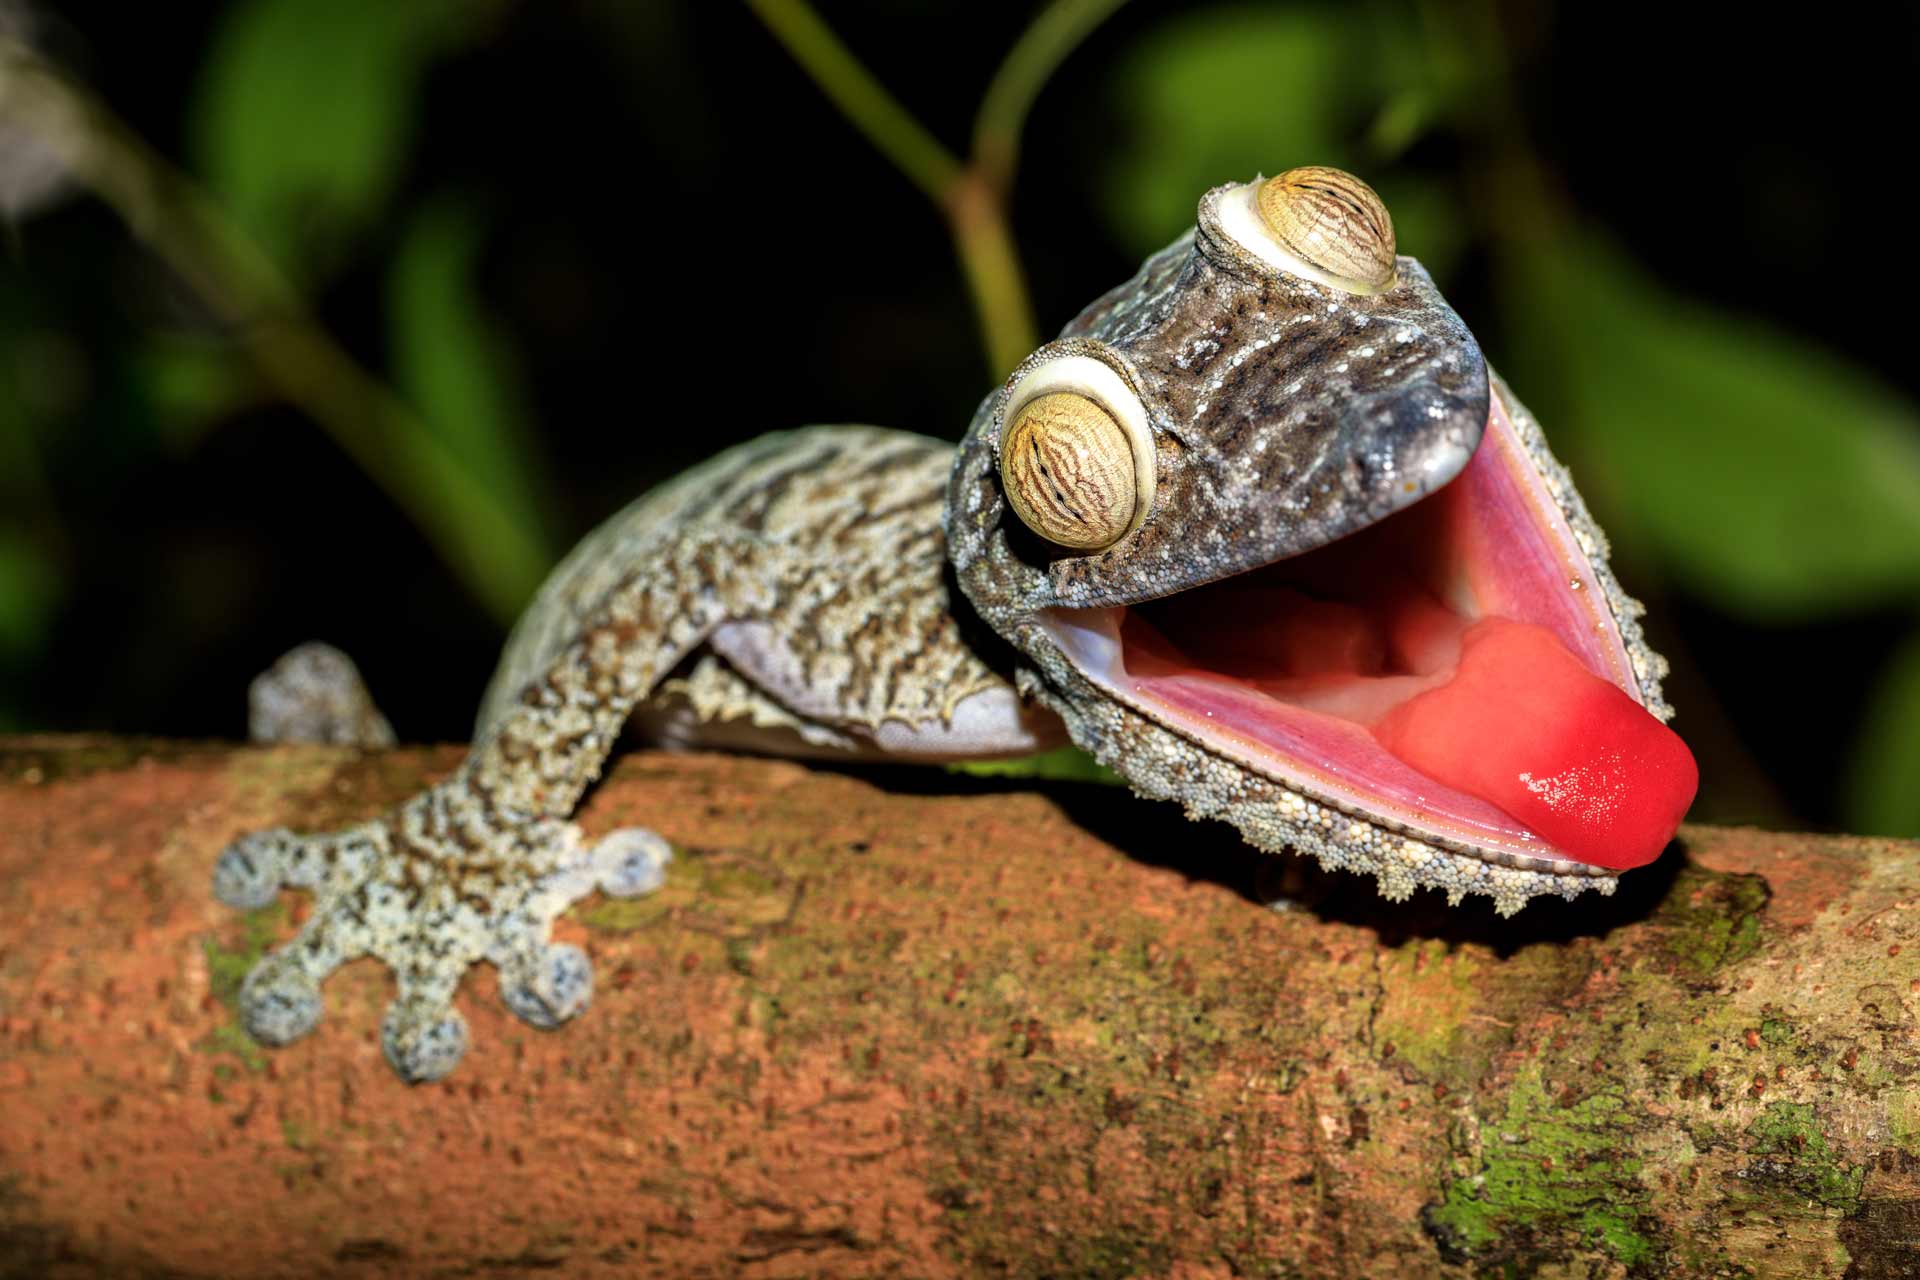 Gecko with opened mouth showing his red tongue as defense against the enemy. Madagascar wildlife and wilderness